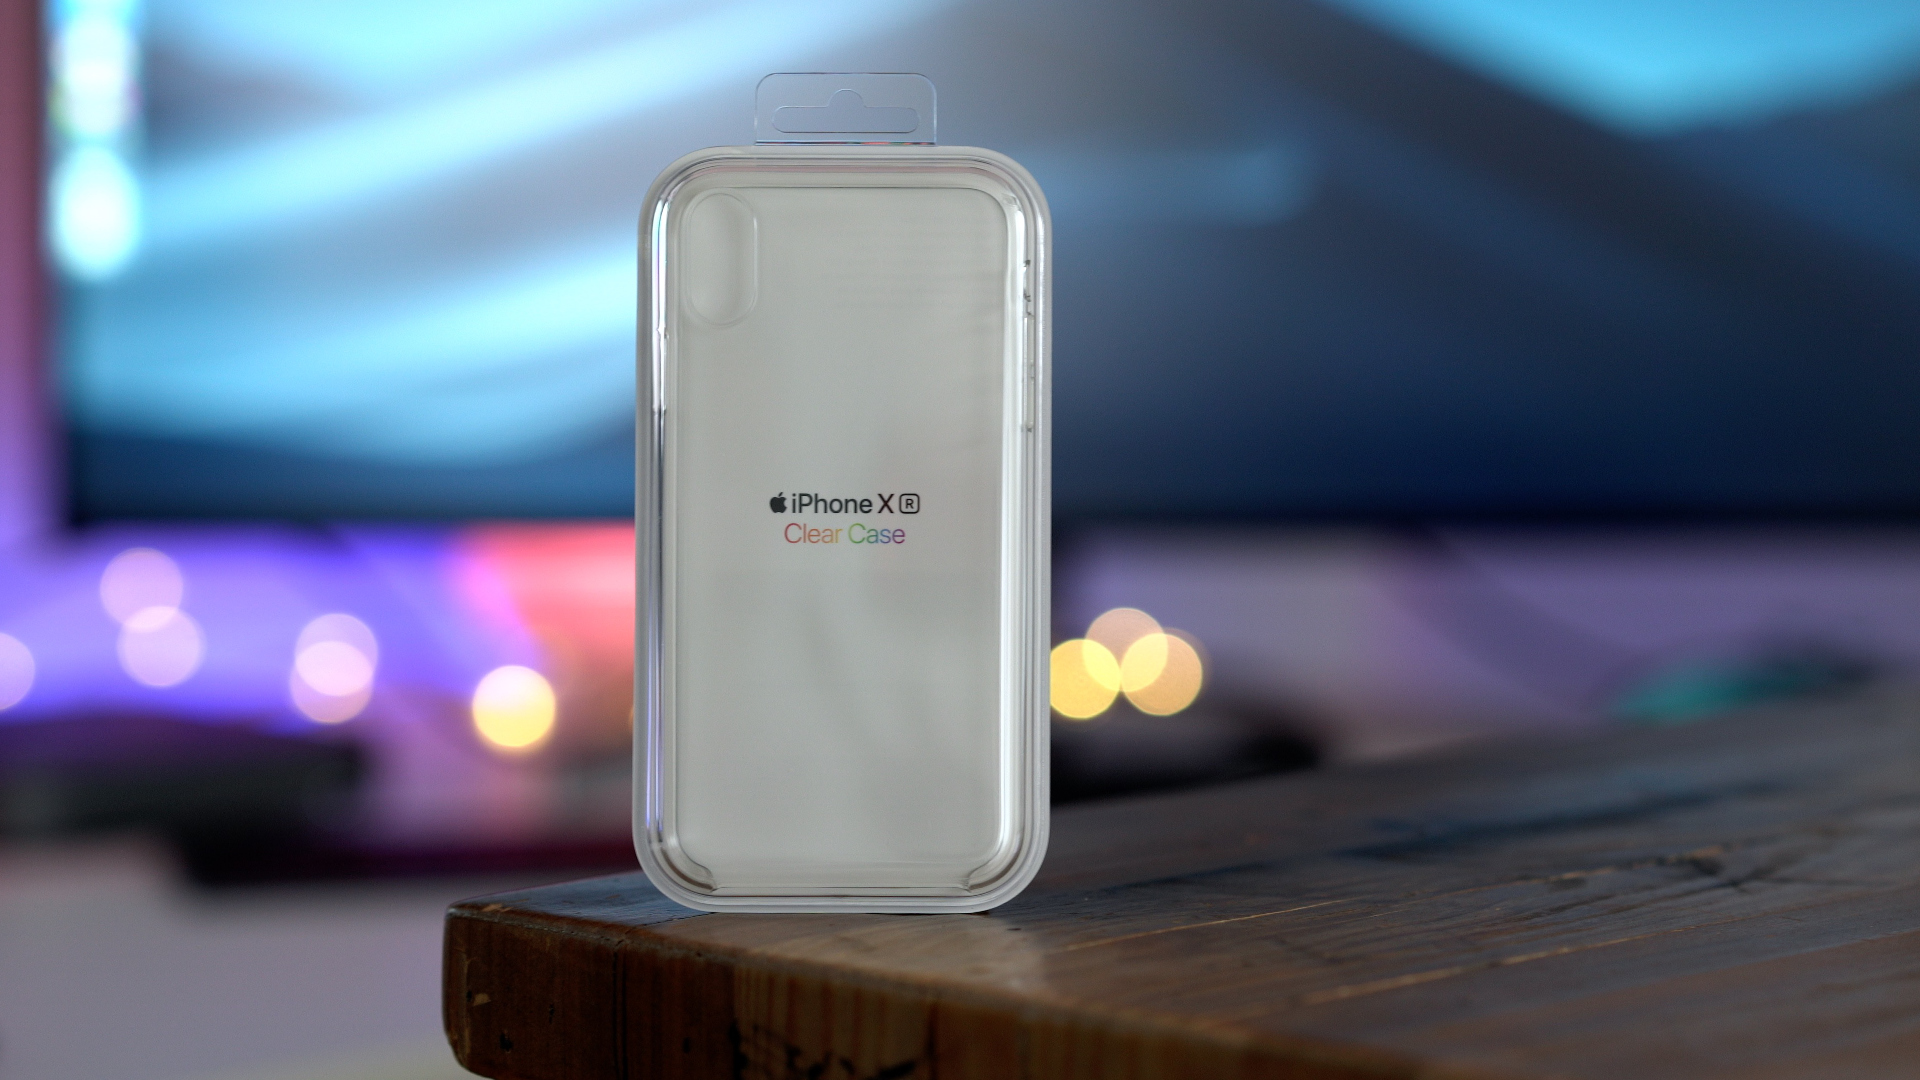 Review: iPhone XR Clear Case - is it worth the premium price